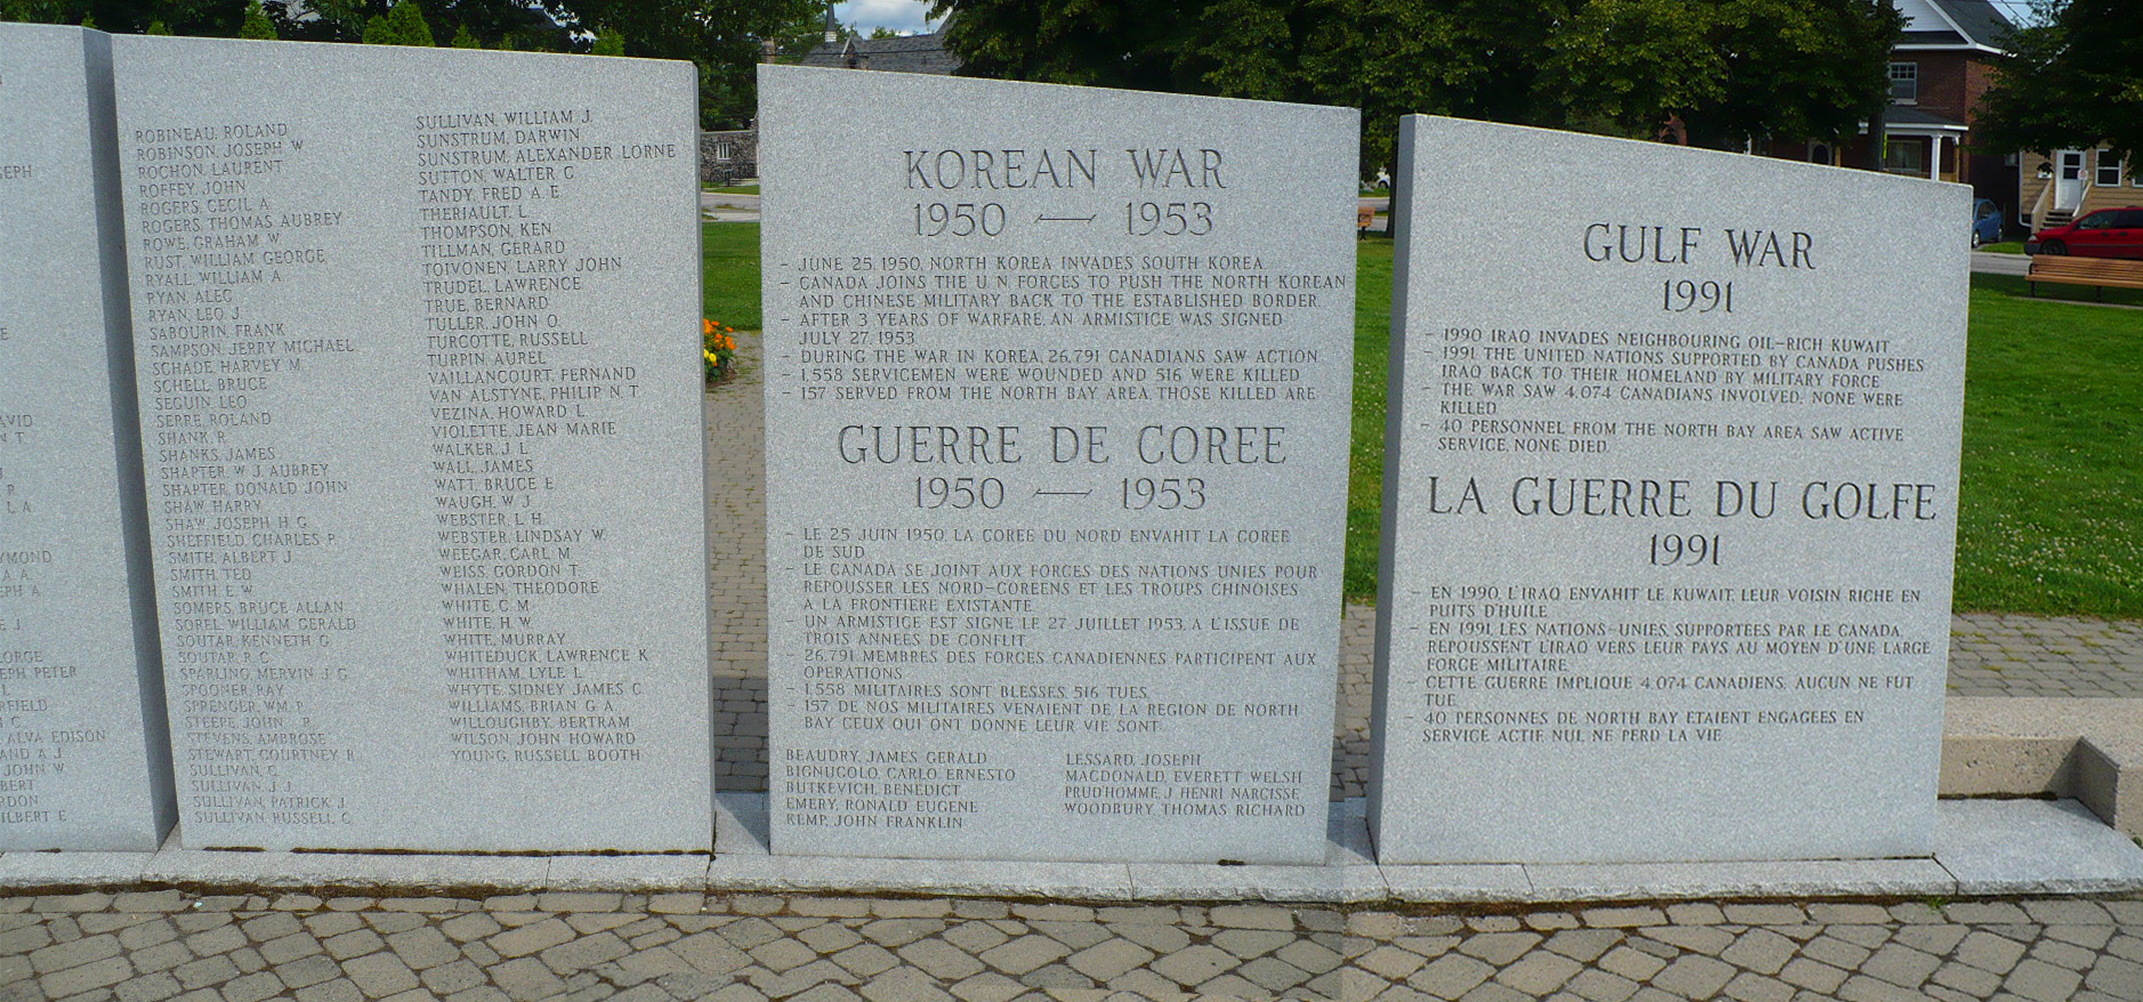 memorial wall (right, continued)